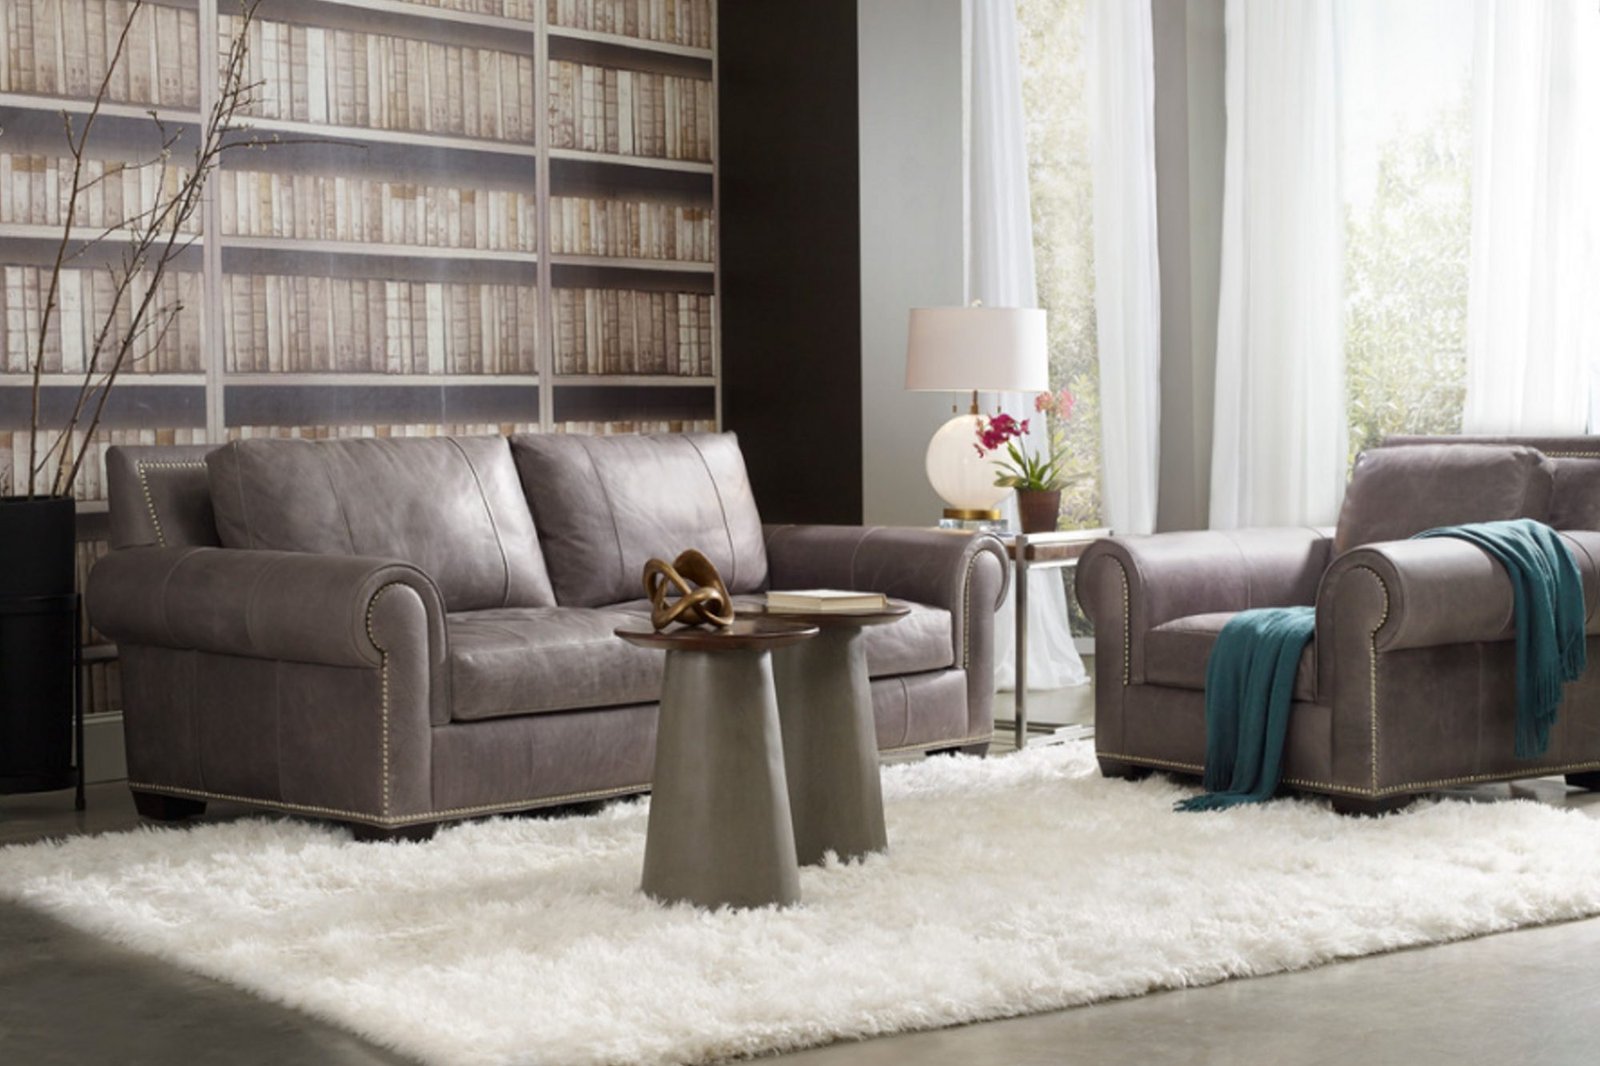 How to Clean Your Leather Furniture